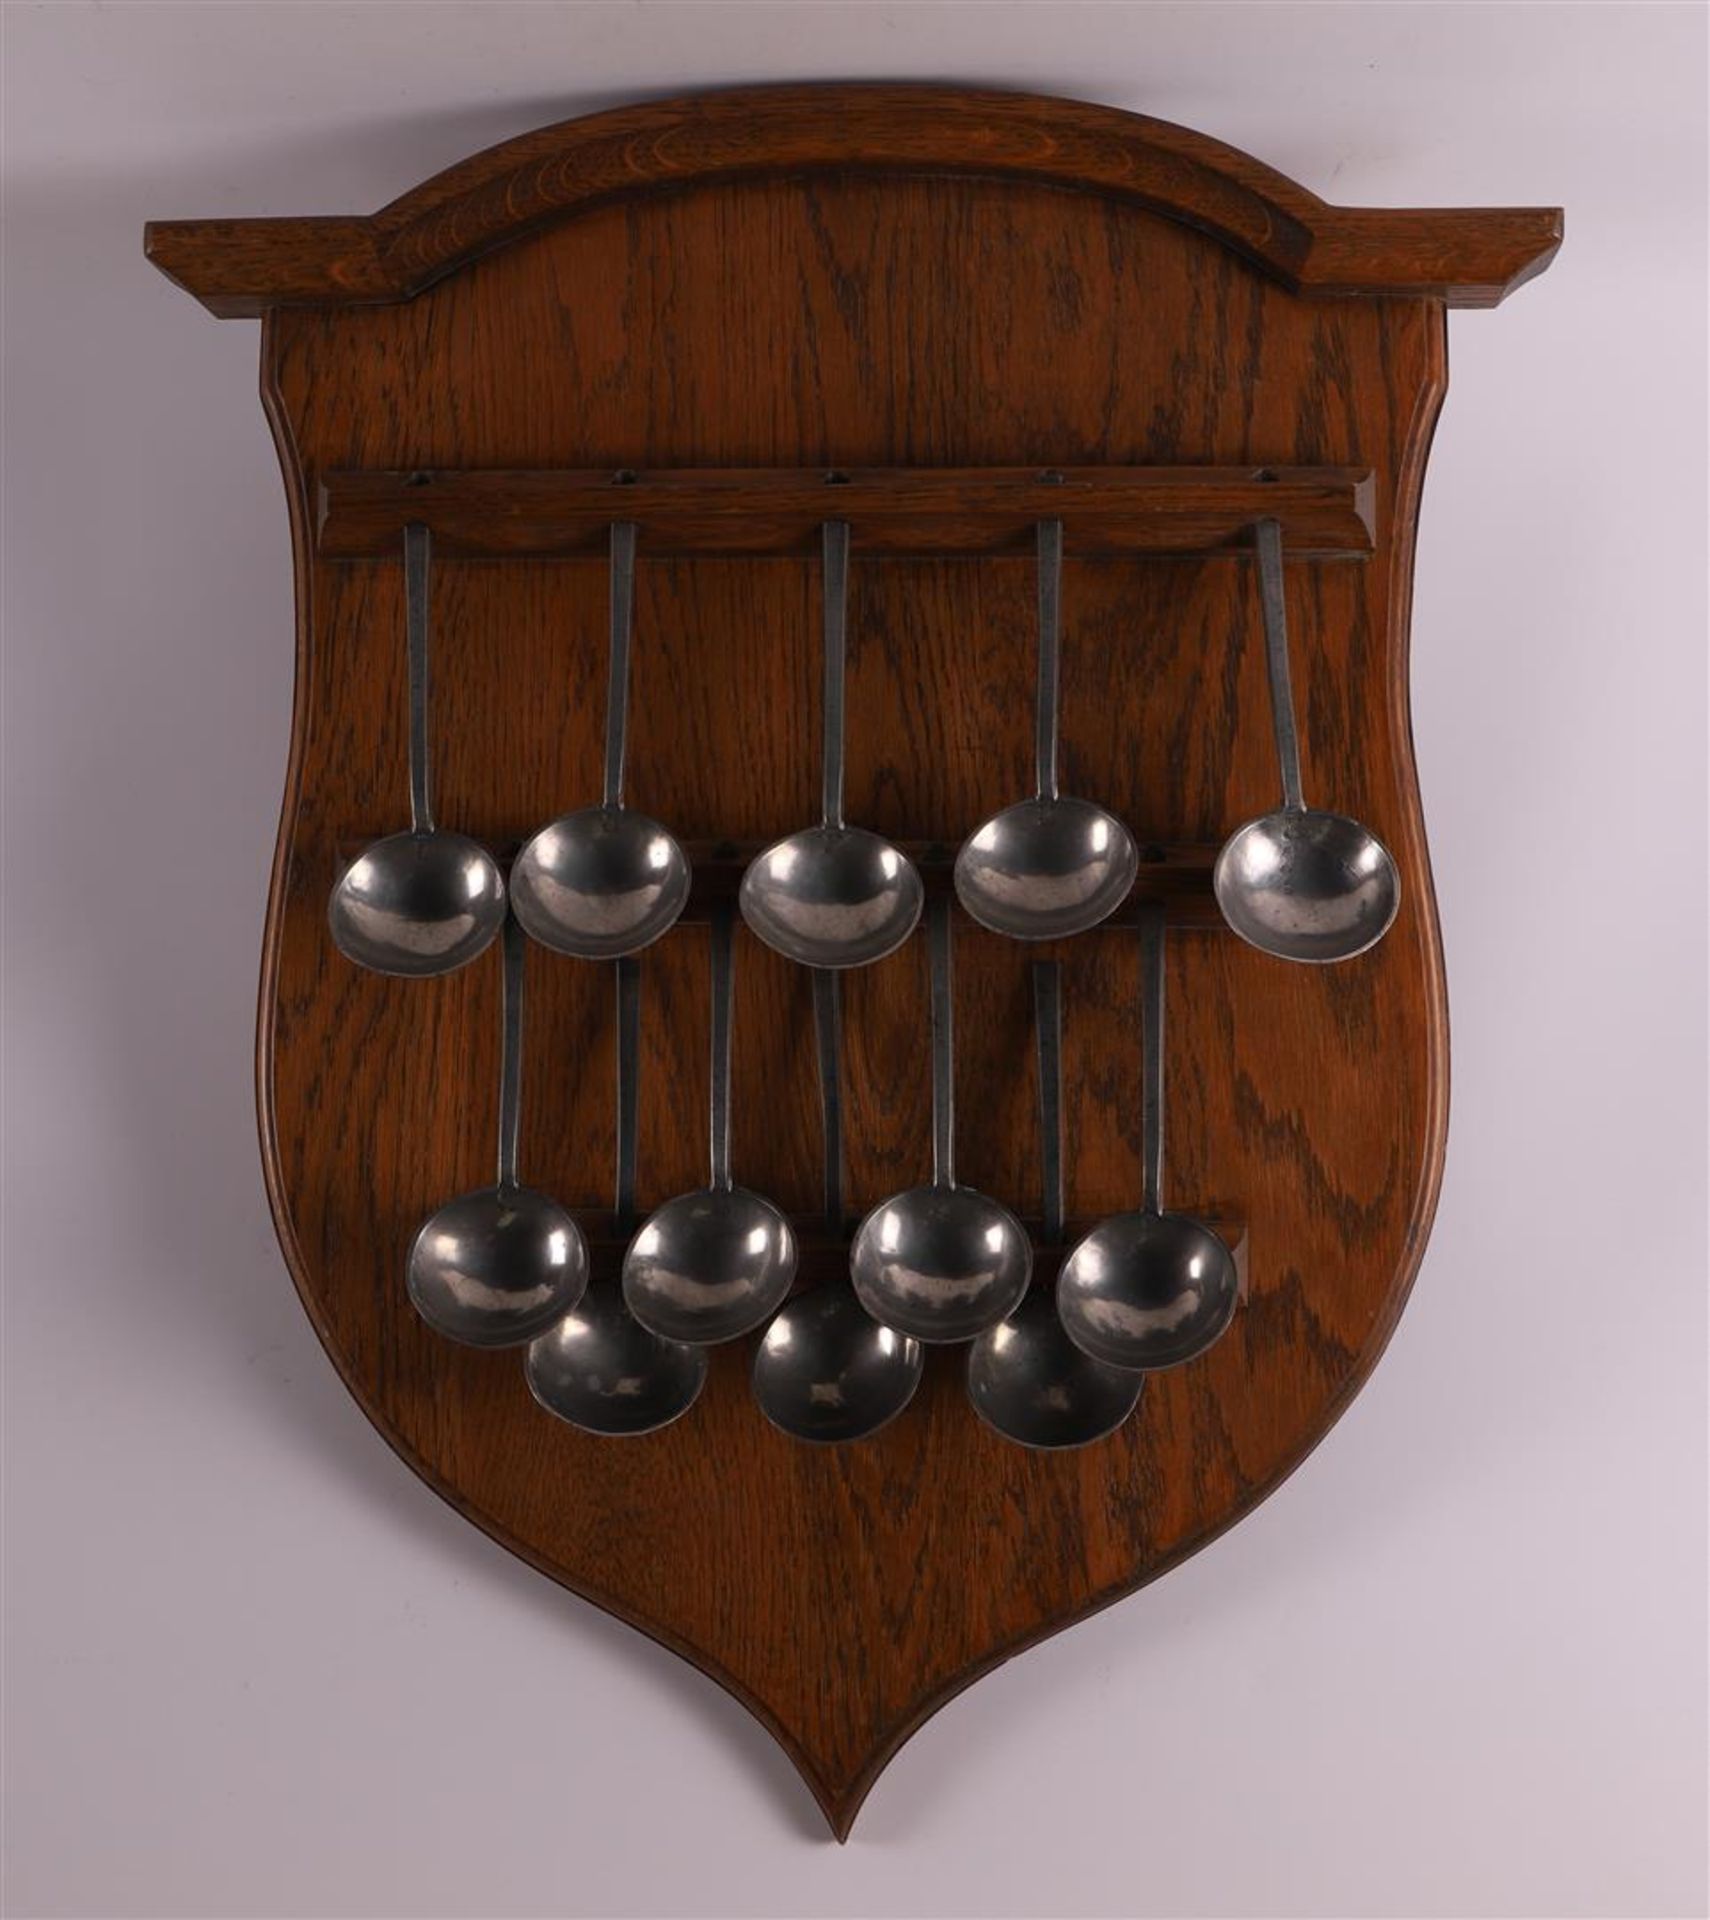 An oak spoon rack with pewter spoons, 20th century and earlier.